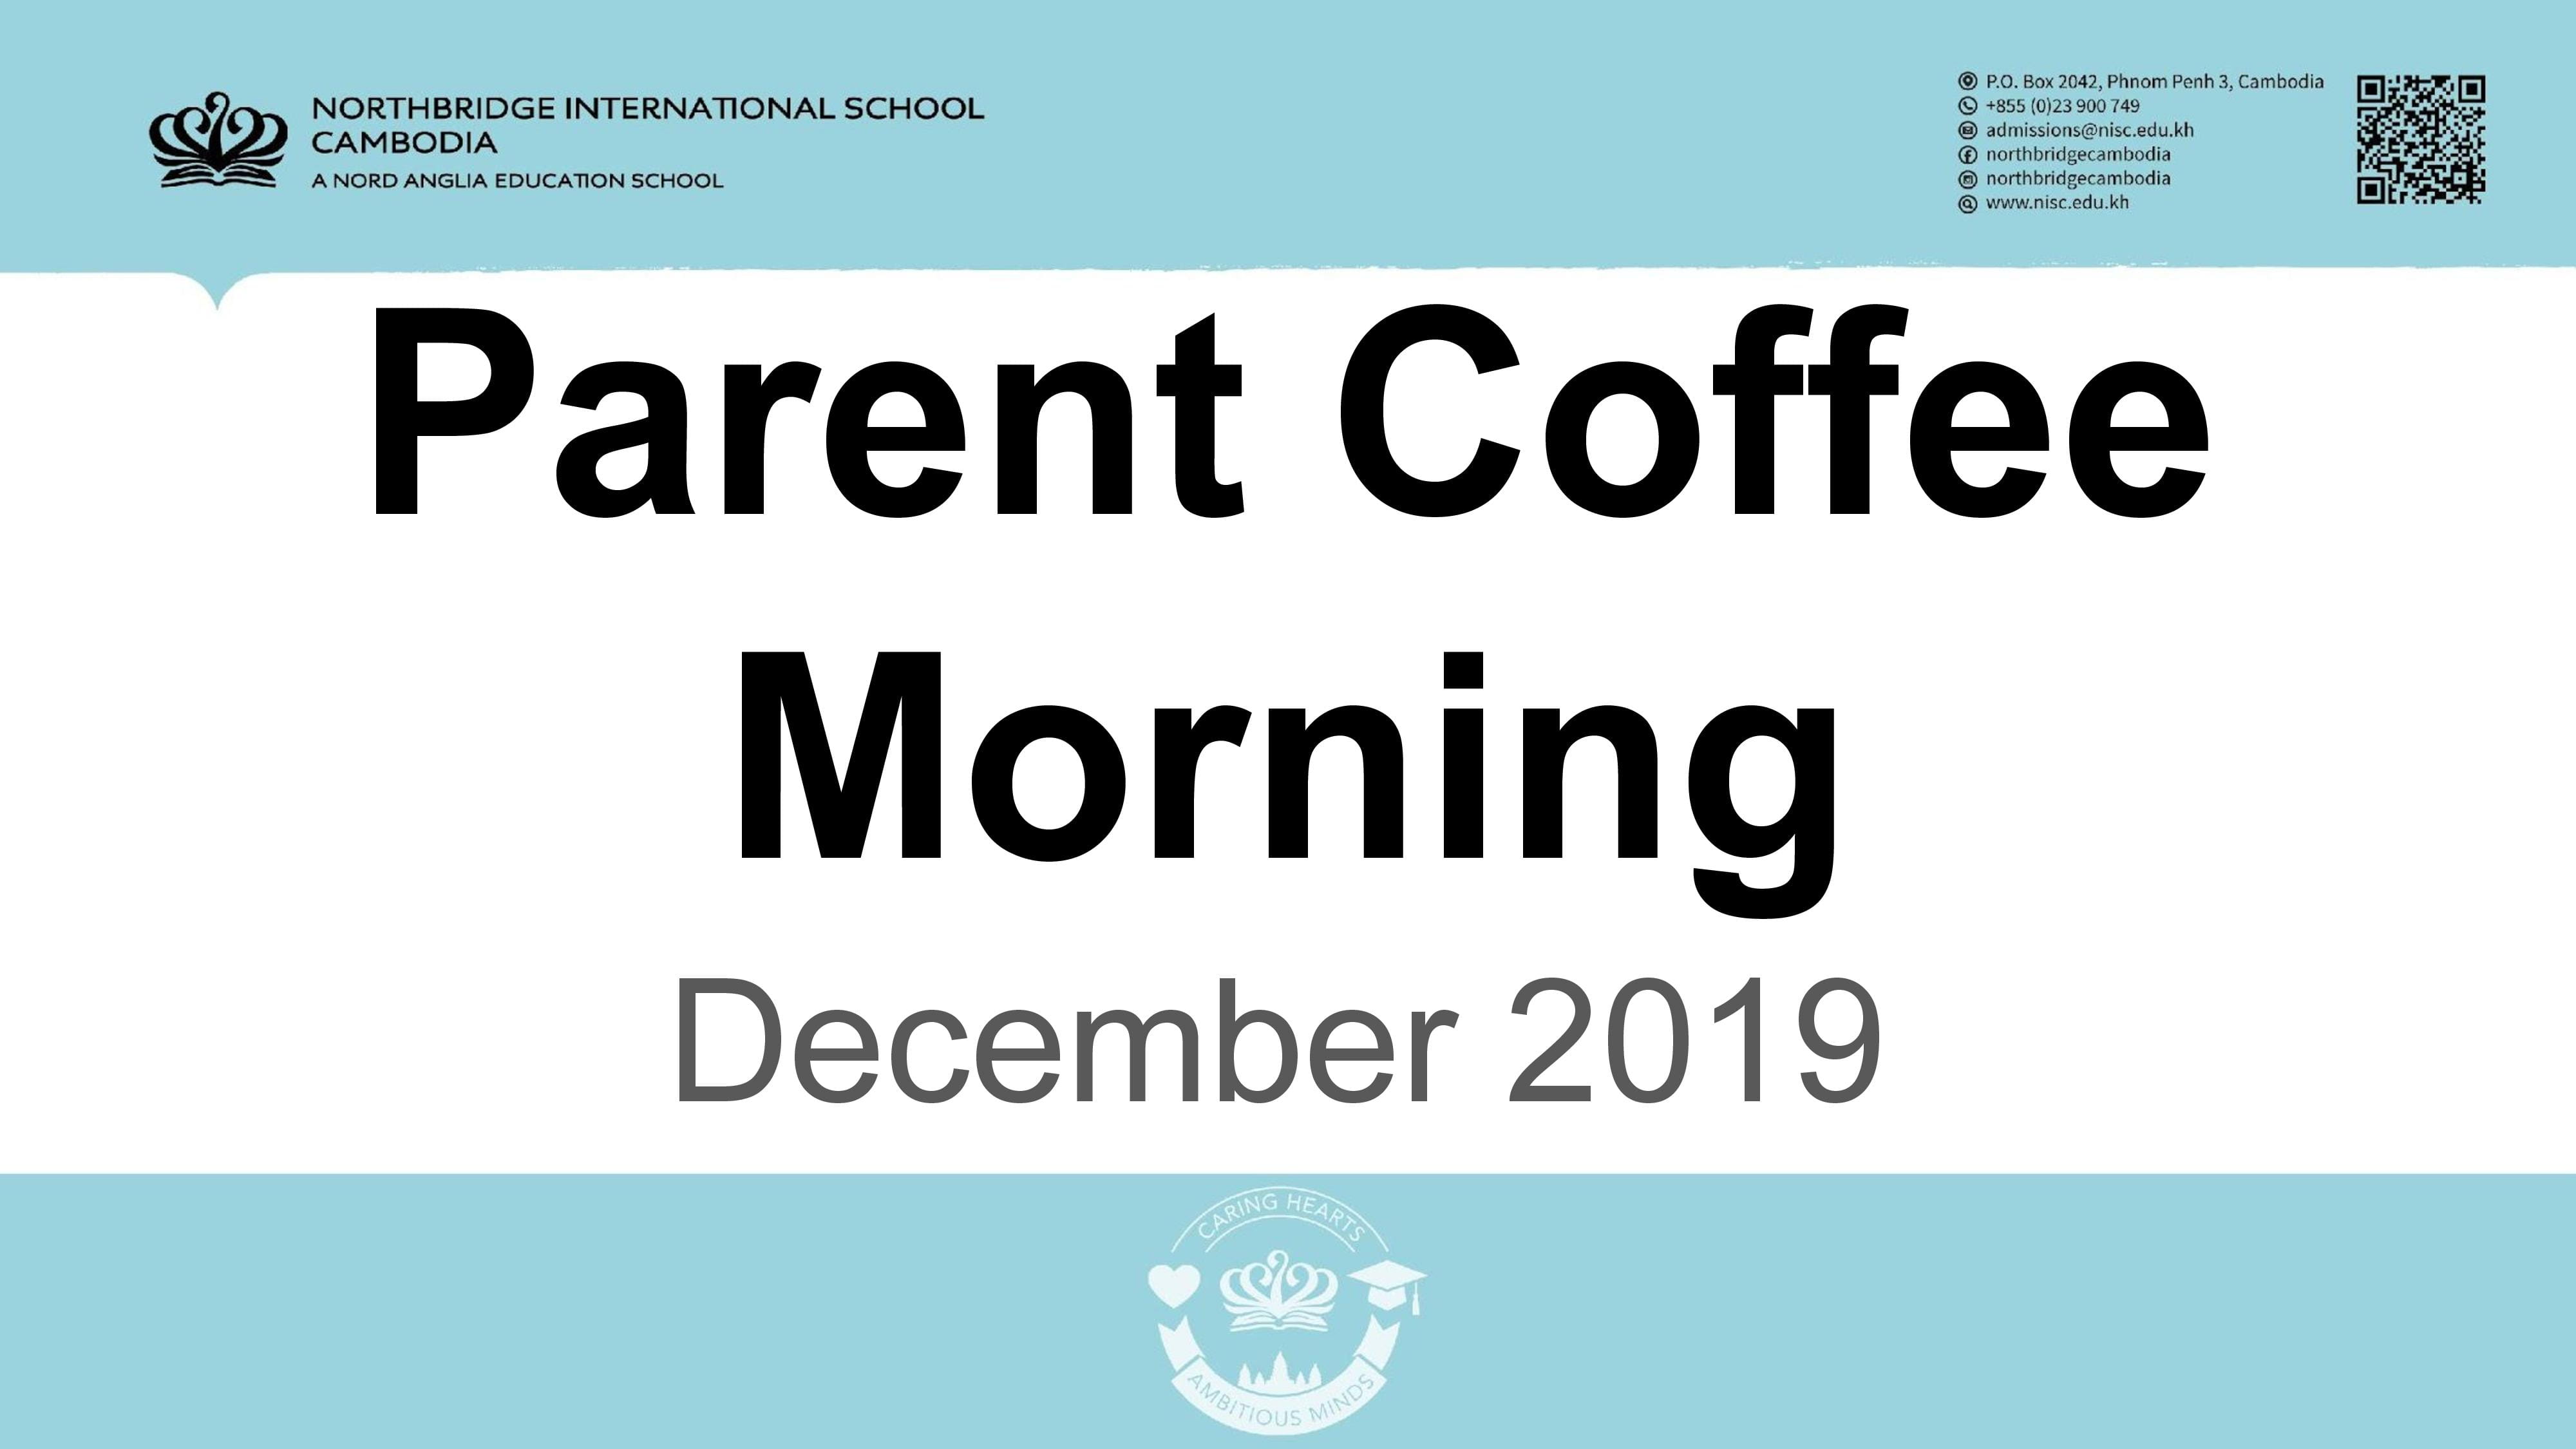 Highlights from the Northbridge Parent Coffee Morning held on Friday 6 December - highlights-from-the-northbridge-parent-coffee-morning-held-on-friday-6-december